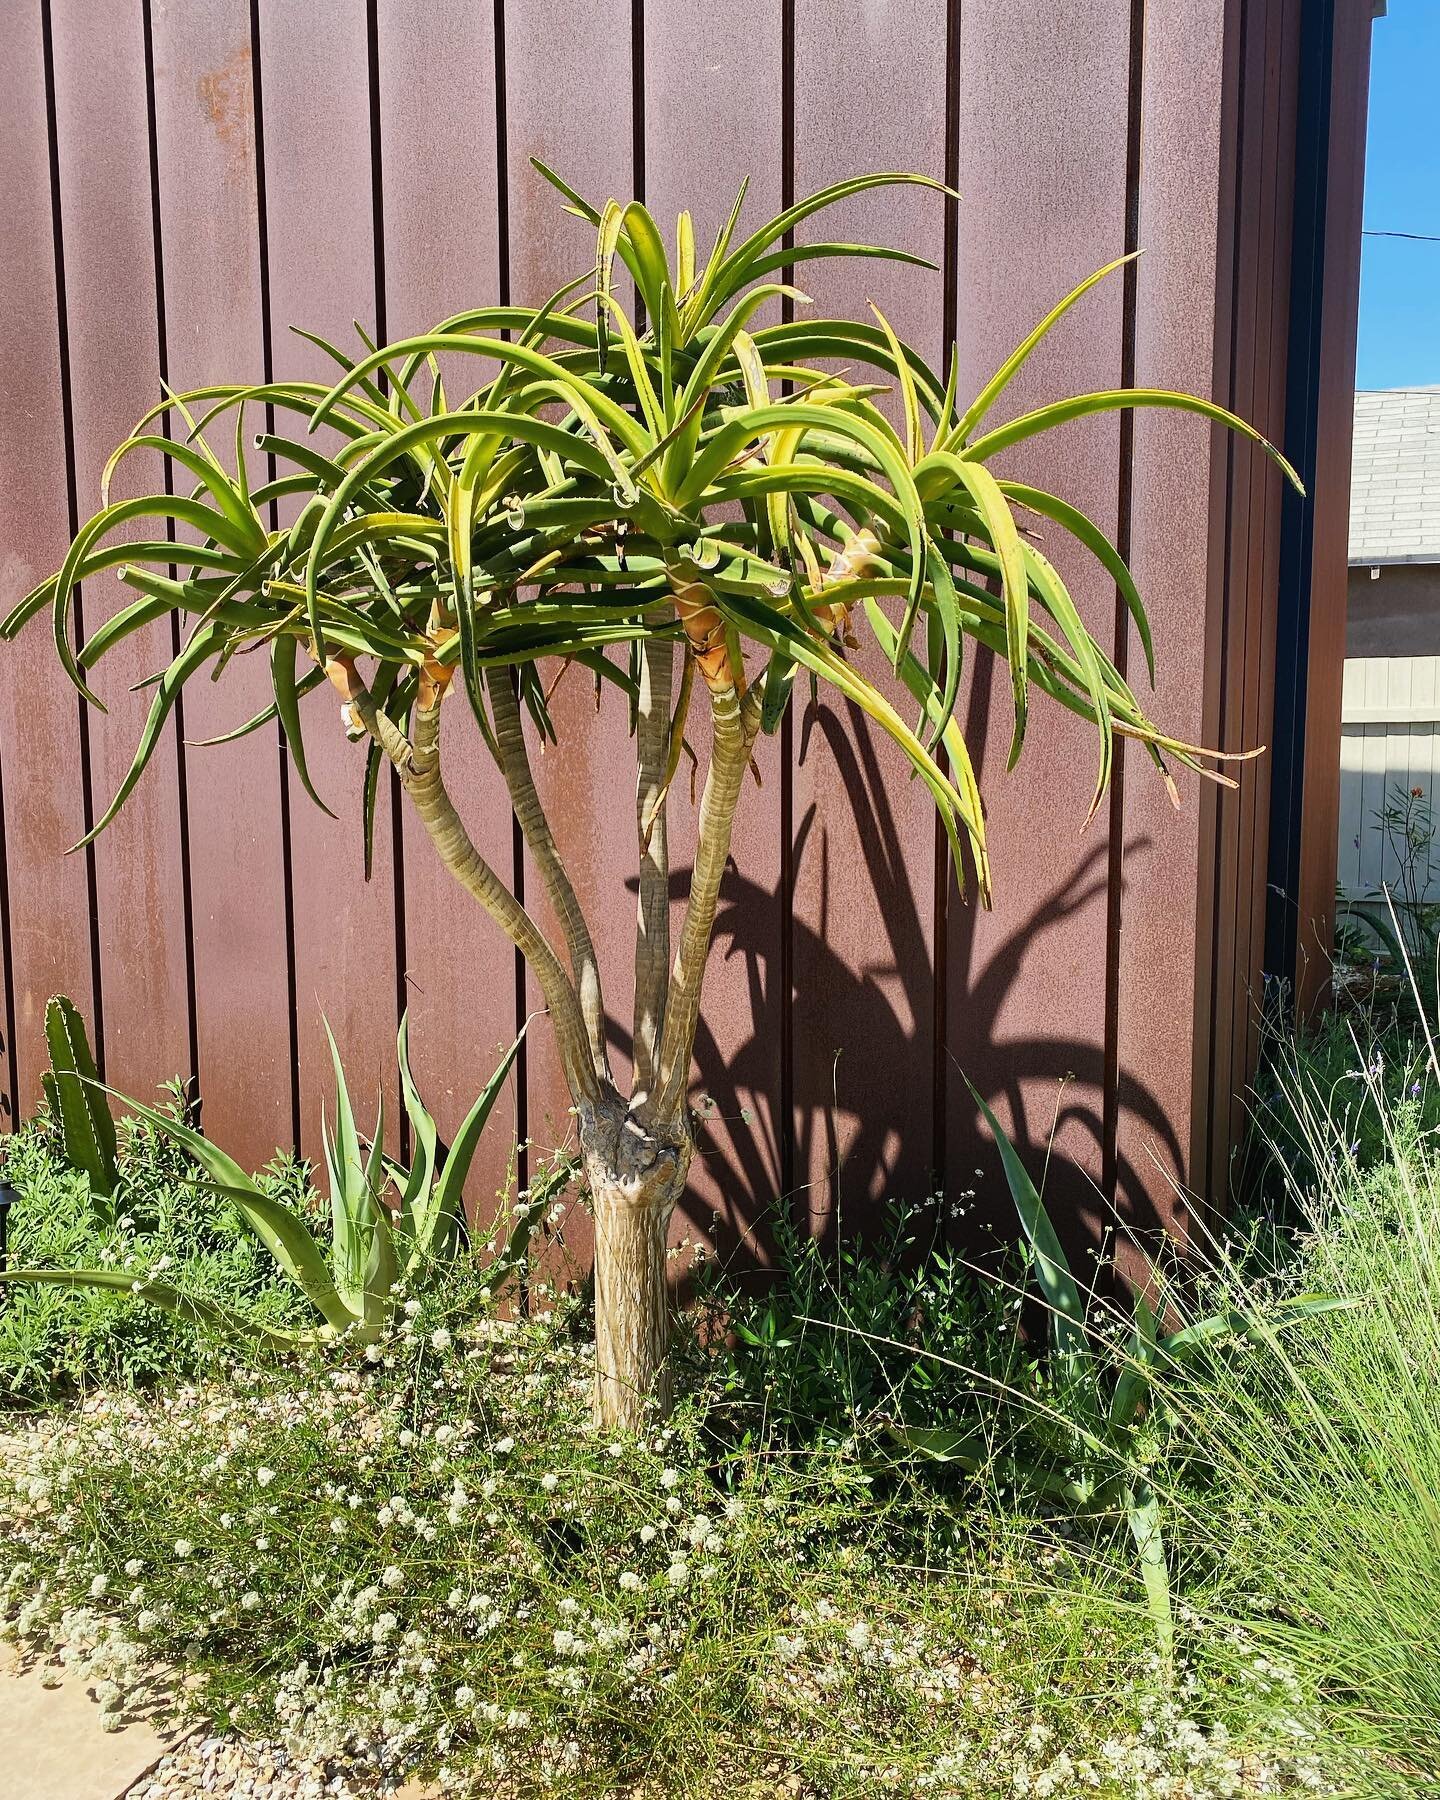 A little moment from a project installed last spring where the various &ldquo;outdoor rooms&rdquo; each have their own unique character. We love the shadow this Aloe makes on the corten steal ADU! #nectarlandscapedesign #nectarissweet #buckwheatflowe